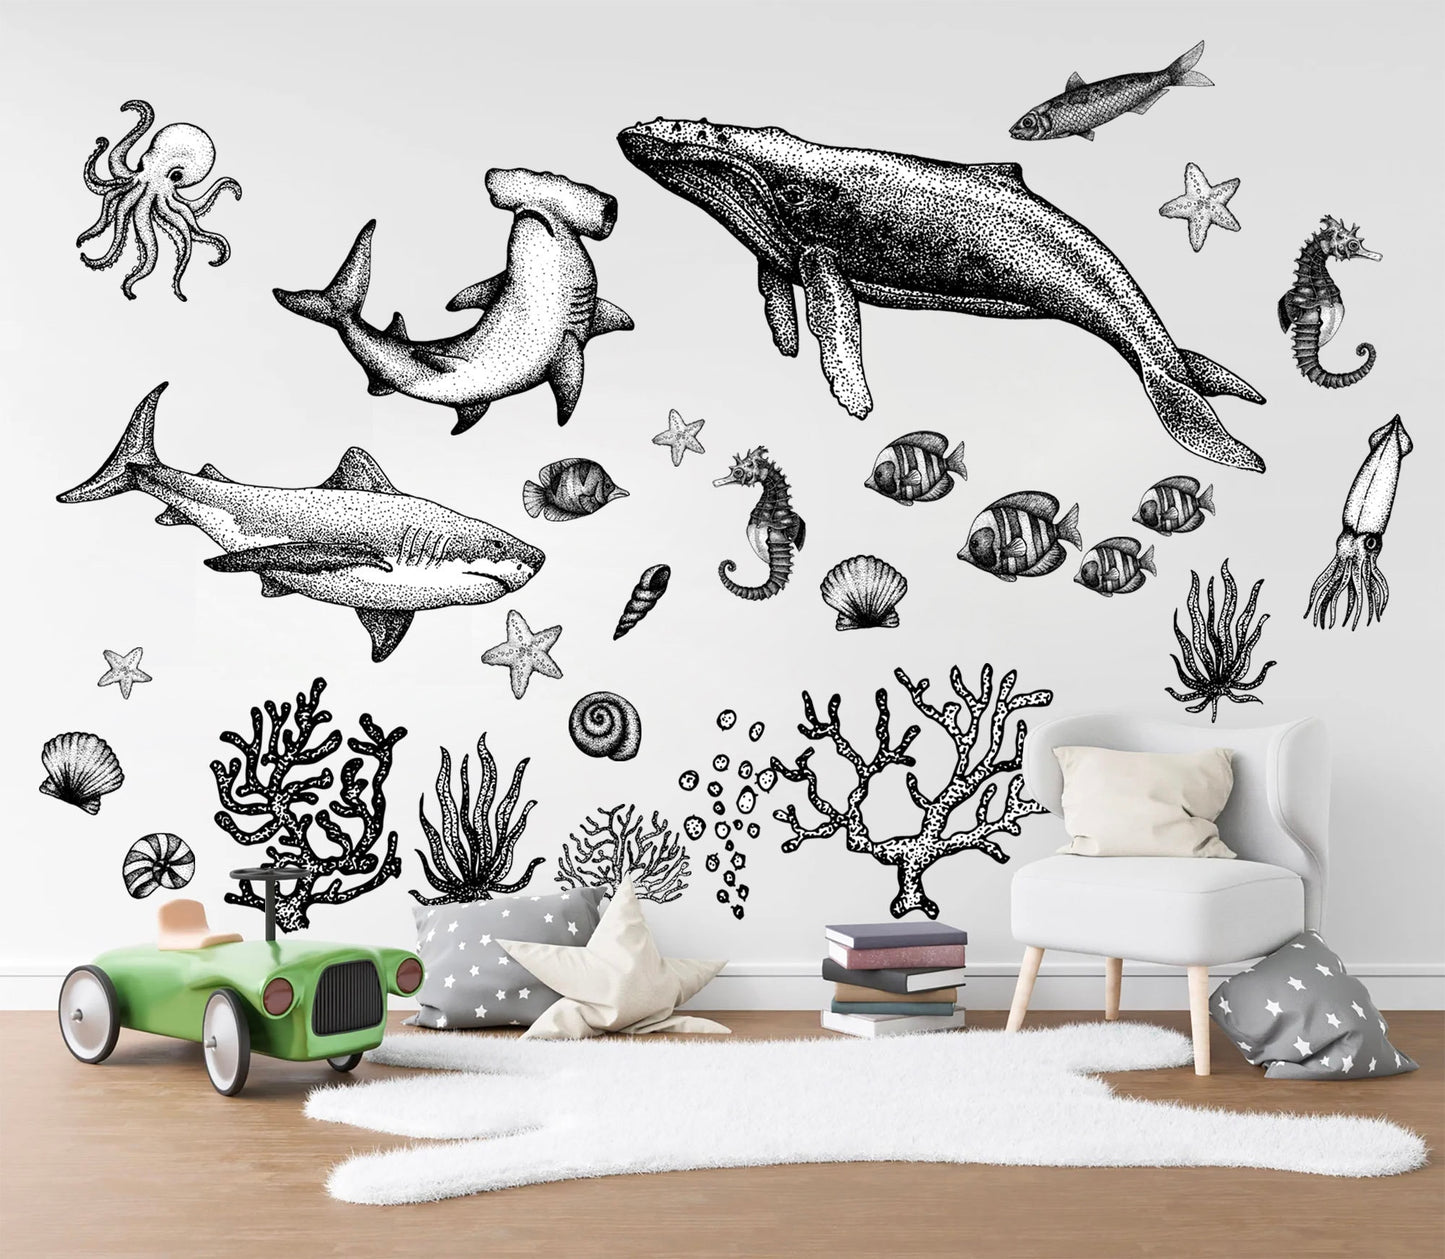 Whimsical Undersea Creatures Wall Decal - Shark Whale Octopus Seahorses Starfish Squid - Monochrome Style - BR248